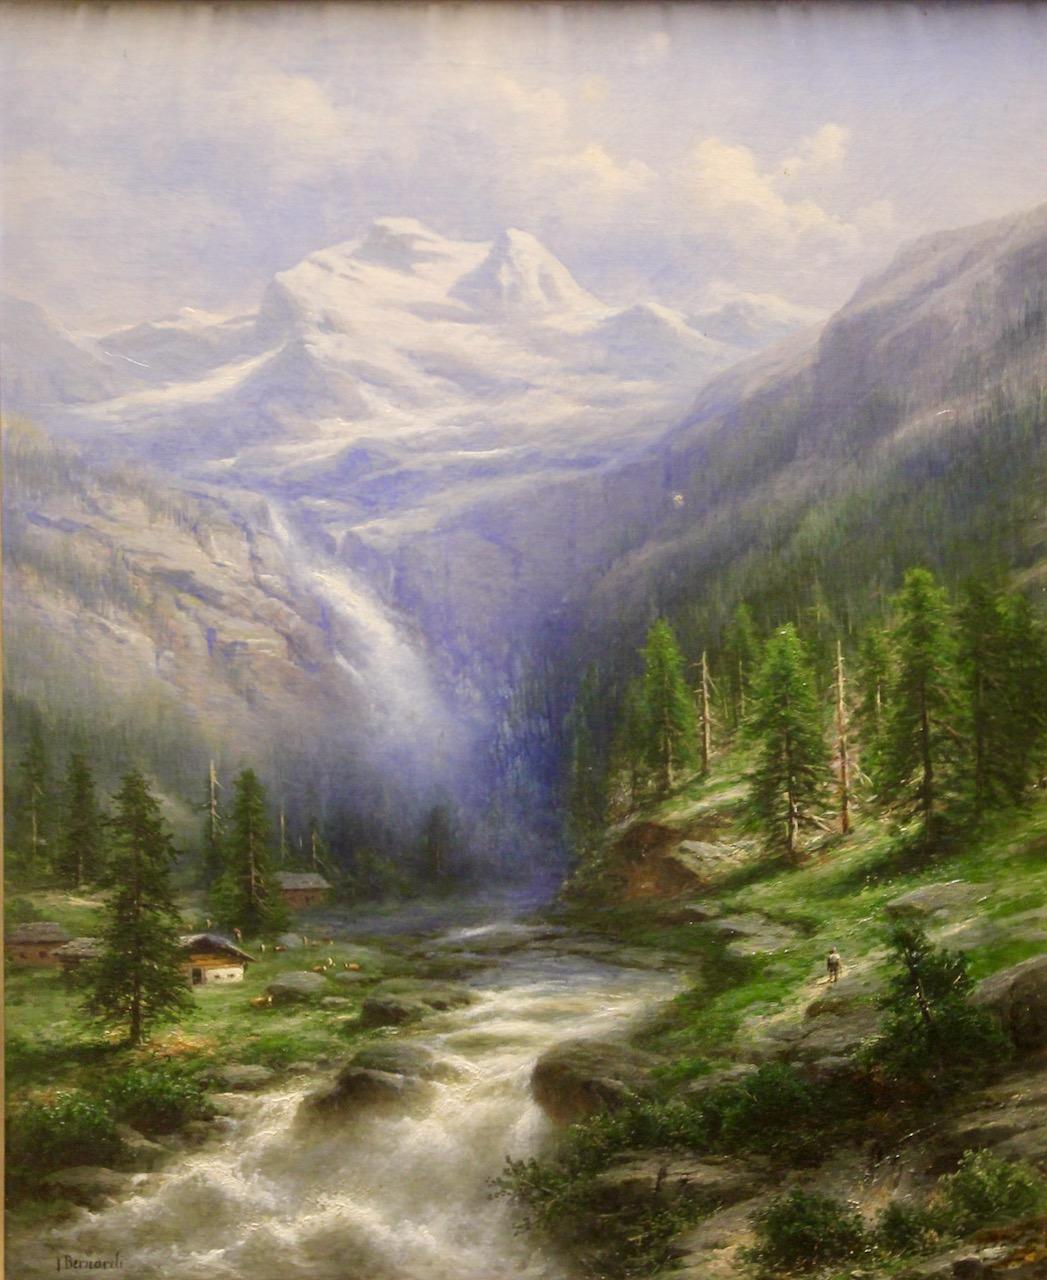 Decorative Oil Painting by:
Joseph Bernardi, 19th Century, Mountain Gorge with Waterfall, probably in Switzerland.

Dimensions without frame: 64.5 cm x 78 cm

Joseph Bernardi (born 1826 in Düsseldorf, died March 9, 1907 there) was a German landscape